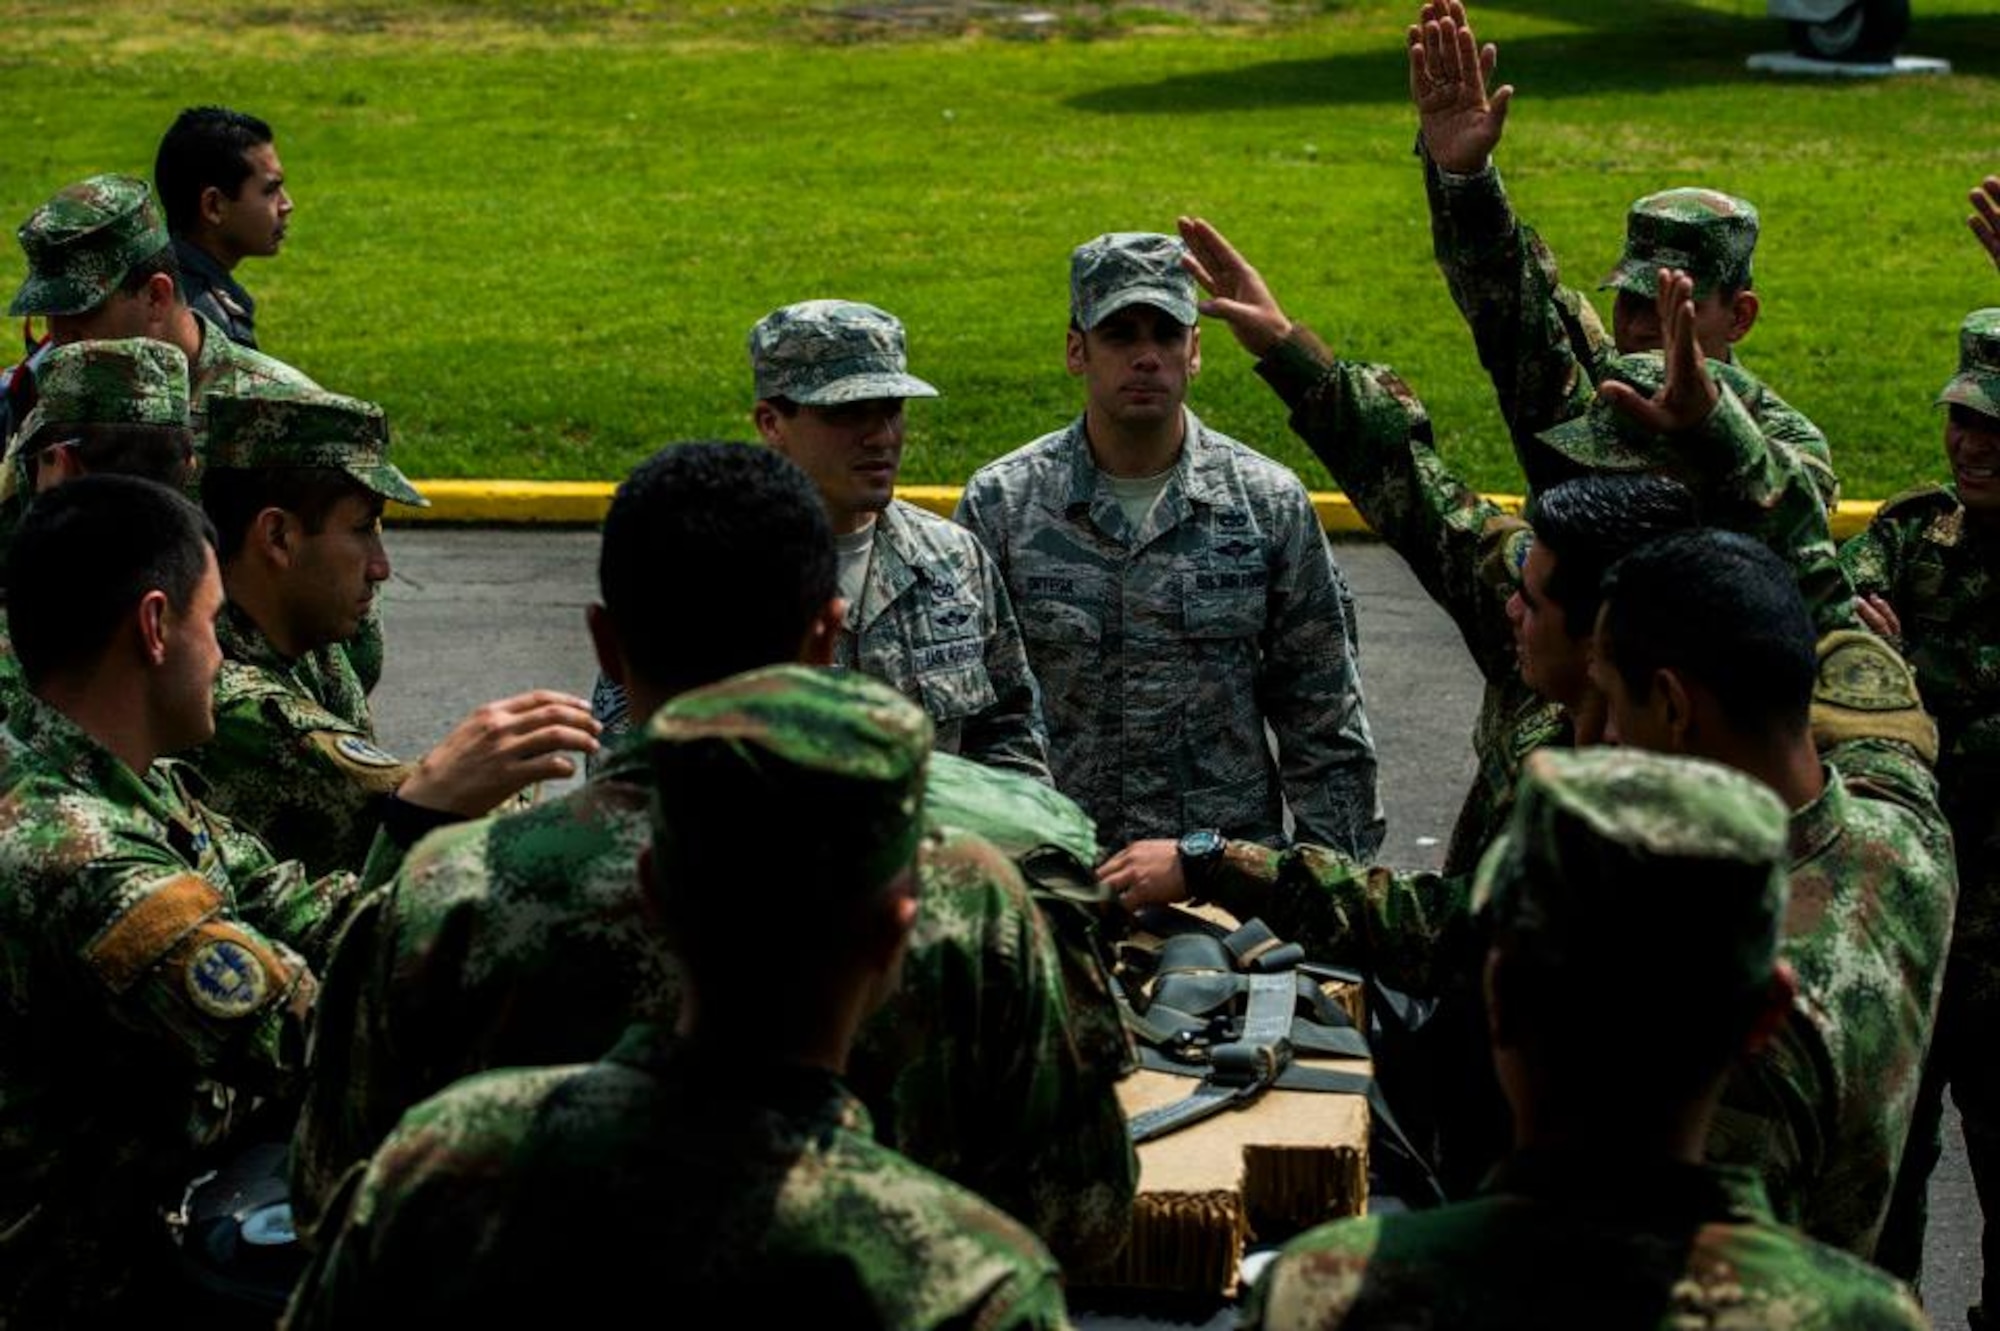 Staff Sgts. Peter Salinas and Angel Ortega, Rigger Air Advisors for the 571st Mobility Support Advisory Squadron, answer questions about pallet building in preparation for the first air drop with United States Air Force personnel aboard on March 2, 2015 at CATAM Air Force Base in Colombia, South America. (Photo by U.S. Air Force Tech. Sgt. Matthew Hannen)